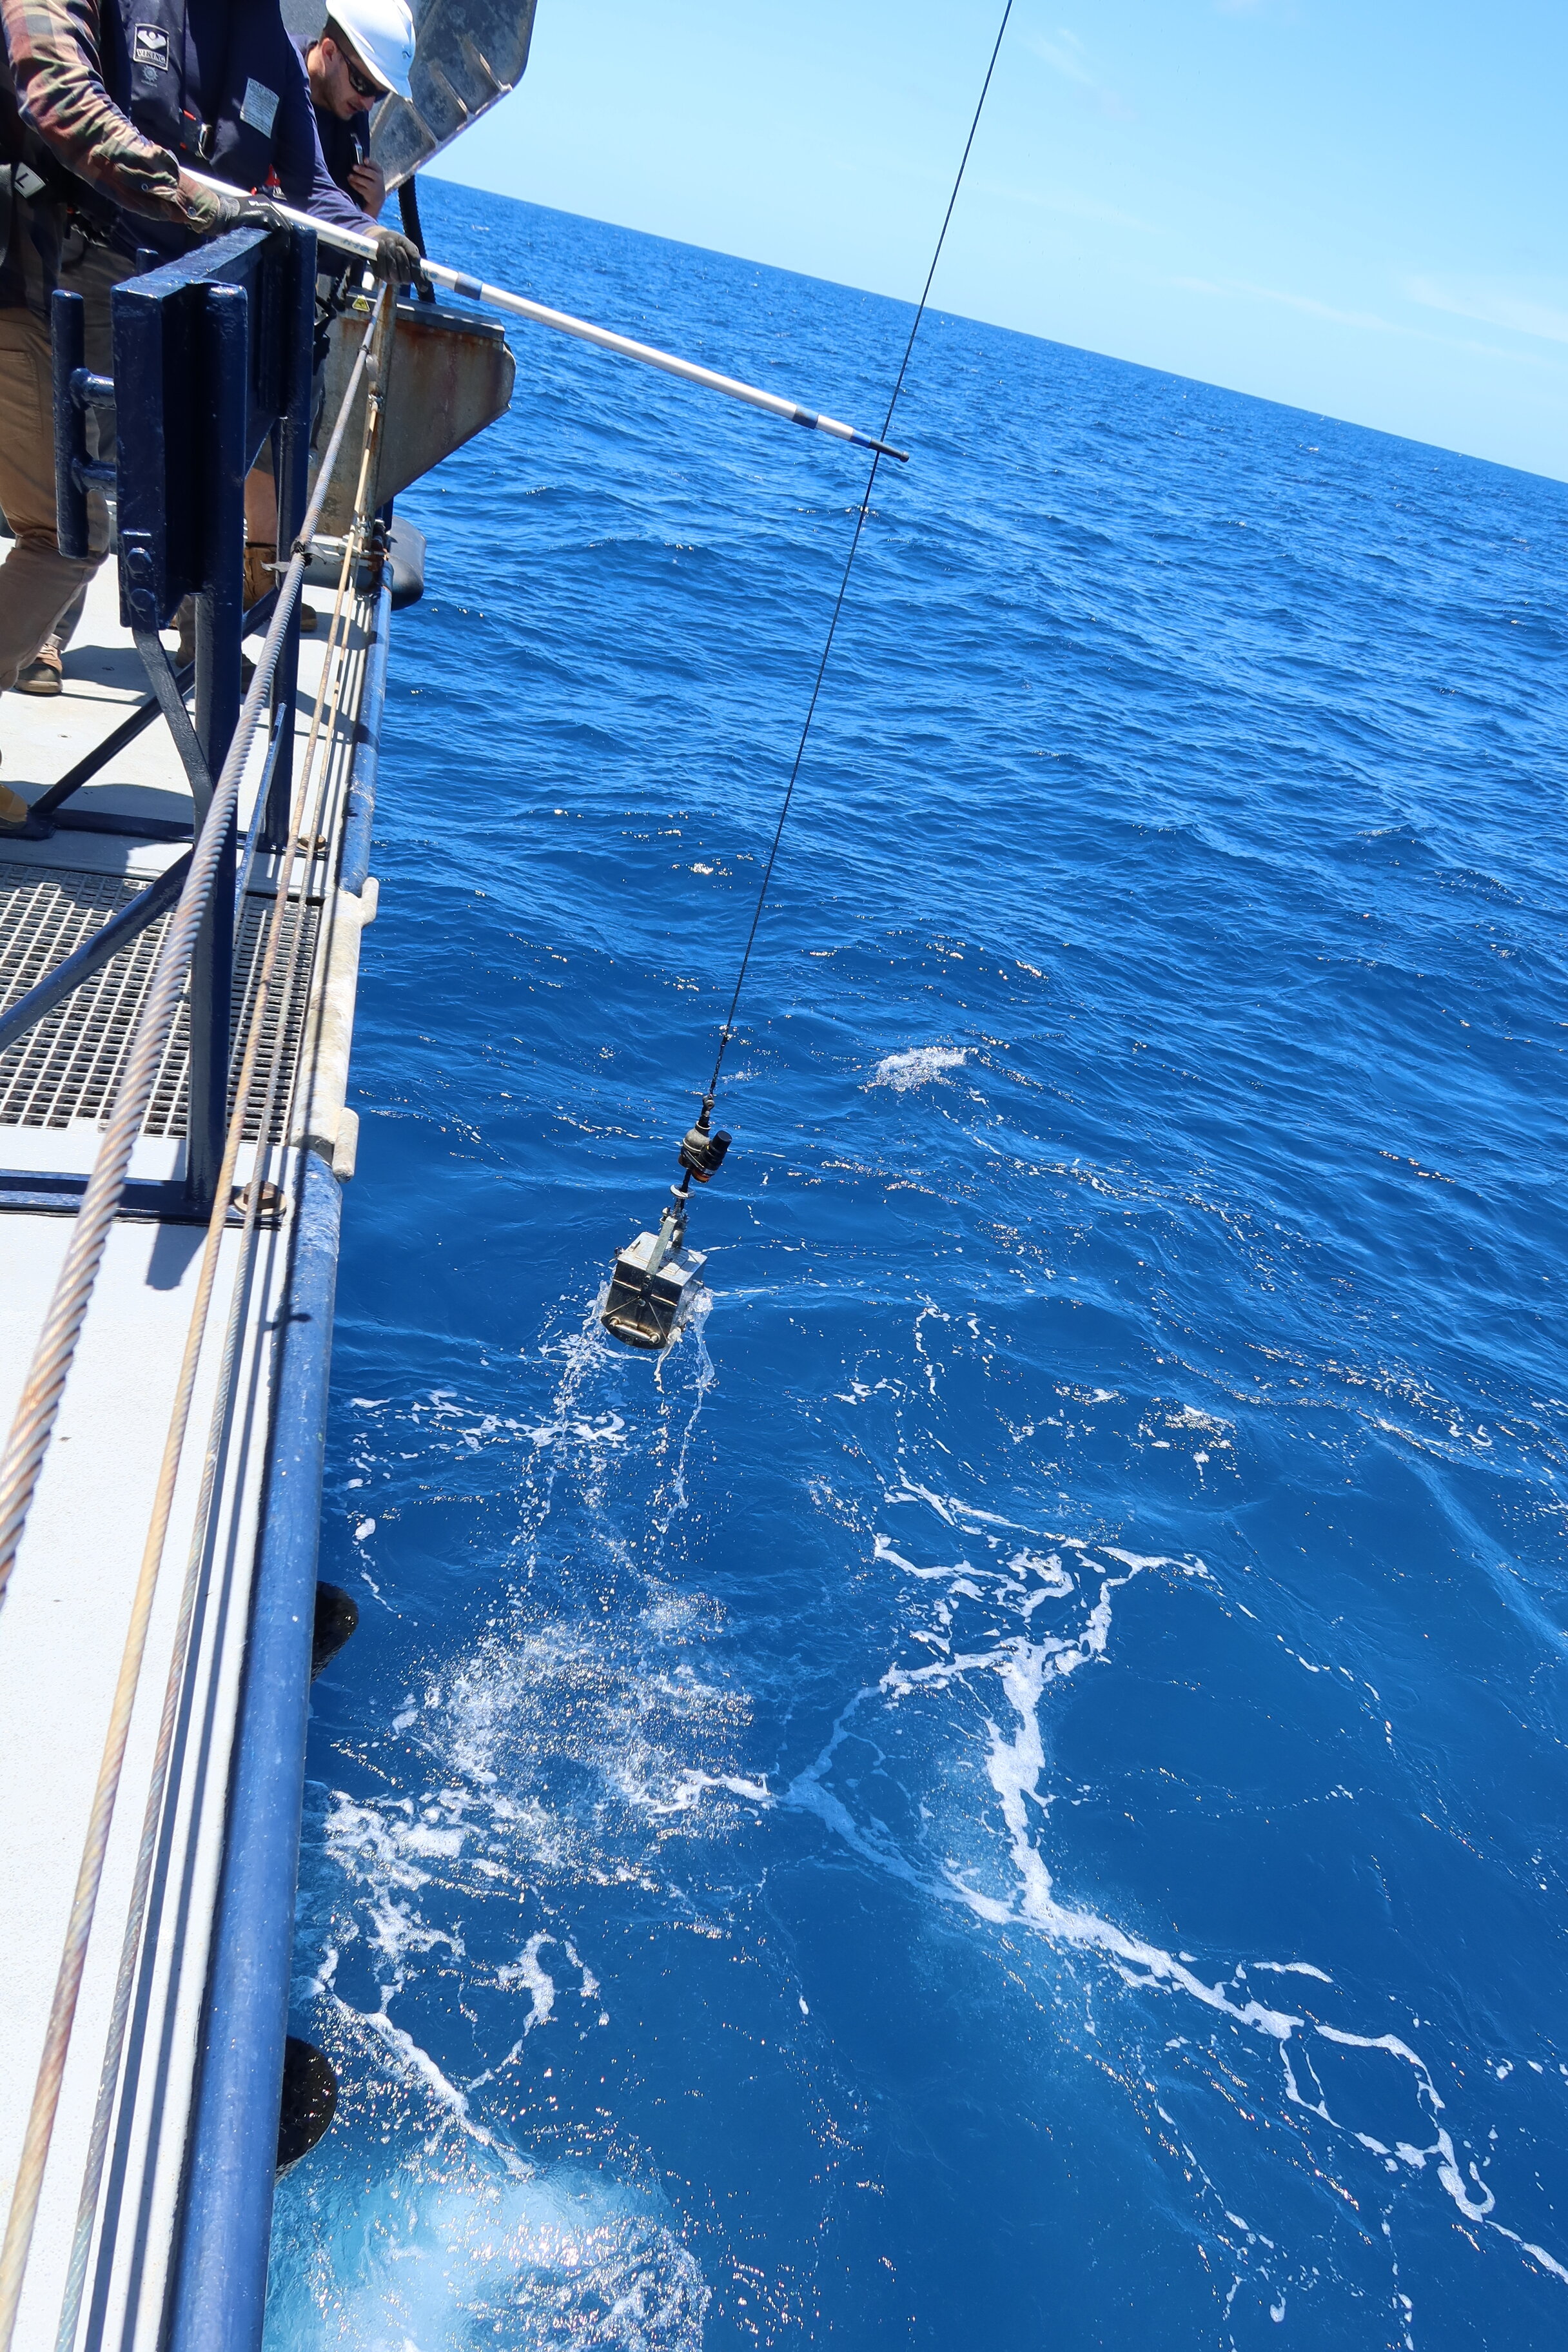  Seabed sampling on the R/V Falkor during her residency at Artist-At-Sea Program, Great Barrier Sea, December 2020.  The Soul Expanding Ocean #1: Taloi Havini  is commissioned by TBA—Academy and co-produced with Schmidt Ocean Institute, co-founded by